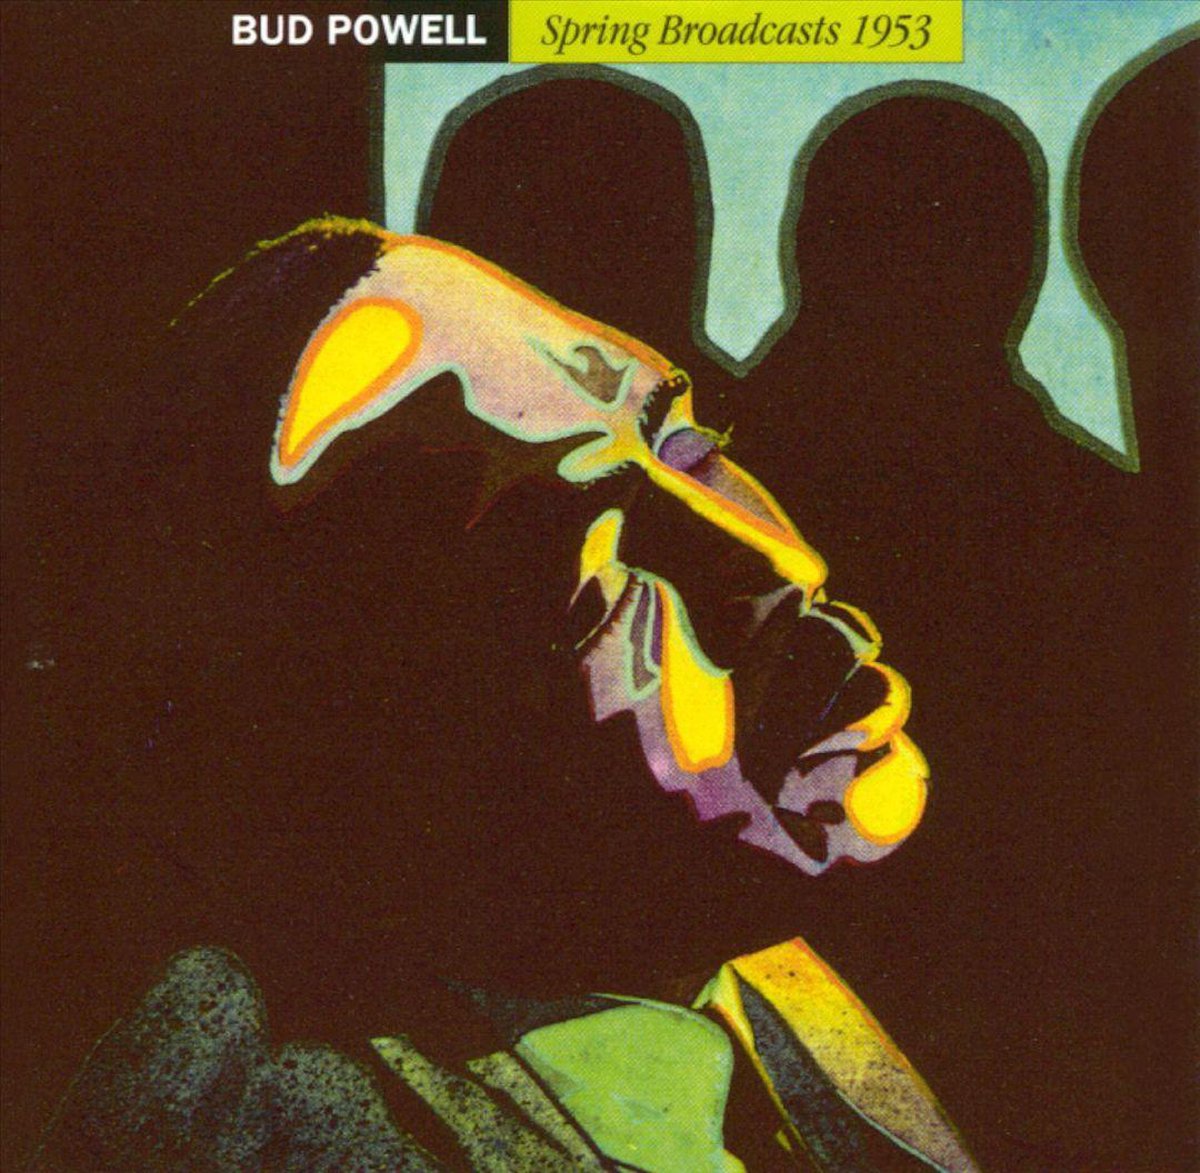 Spring Broadcasts, 1953 - Bud Powell